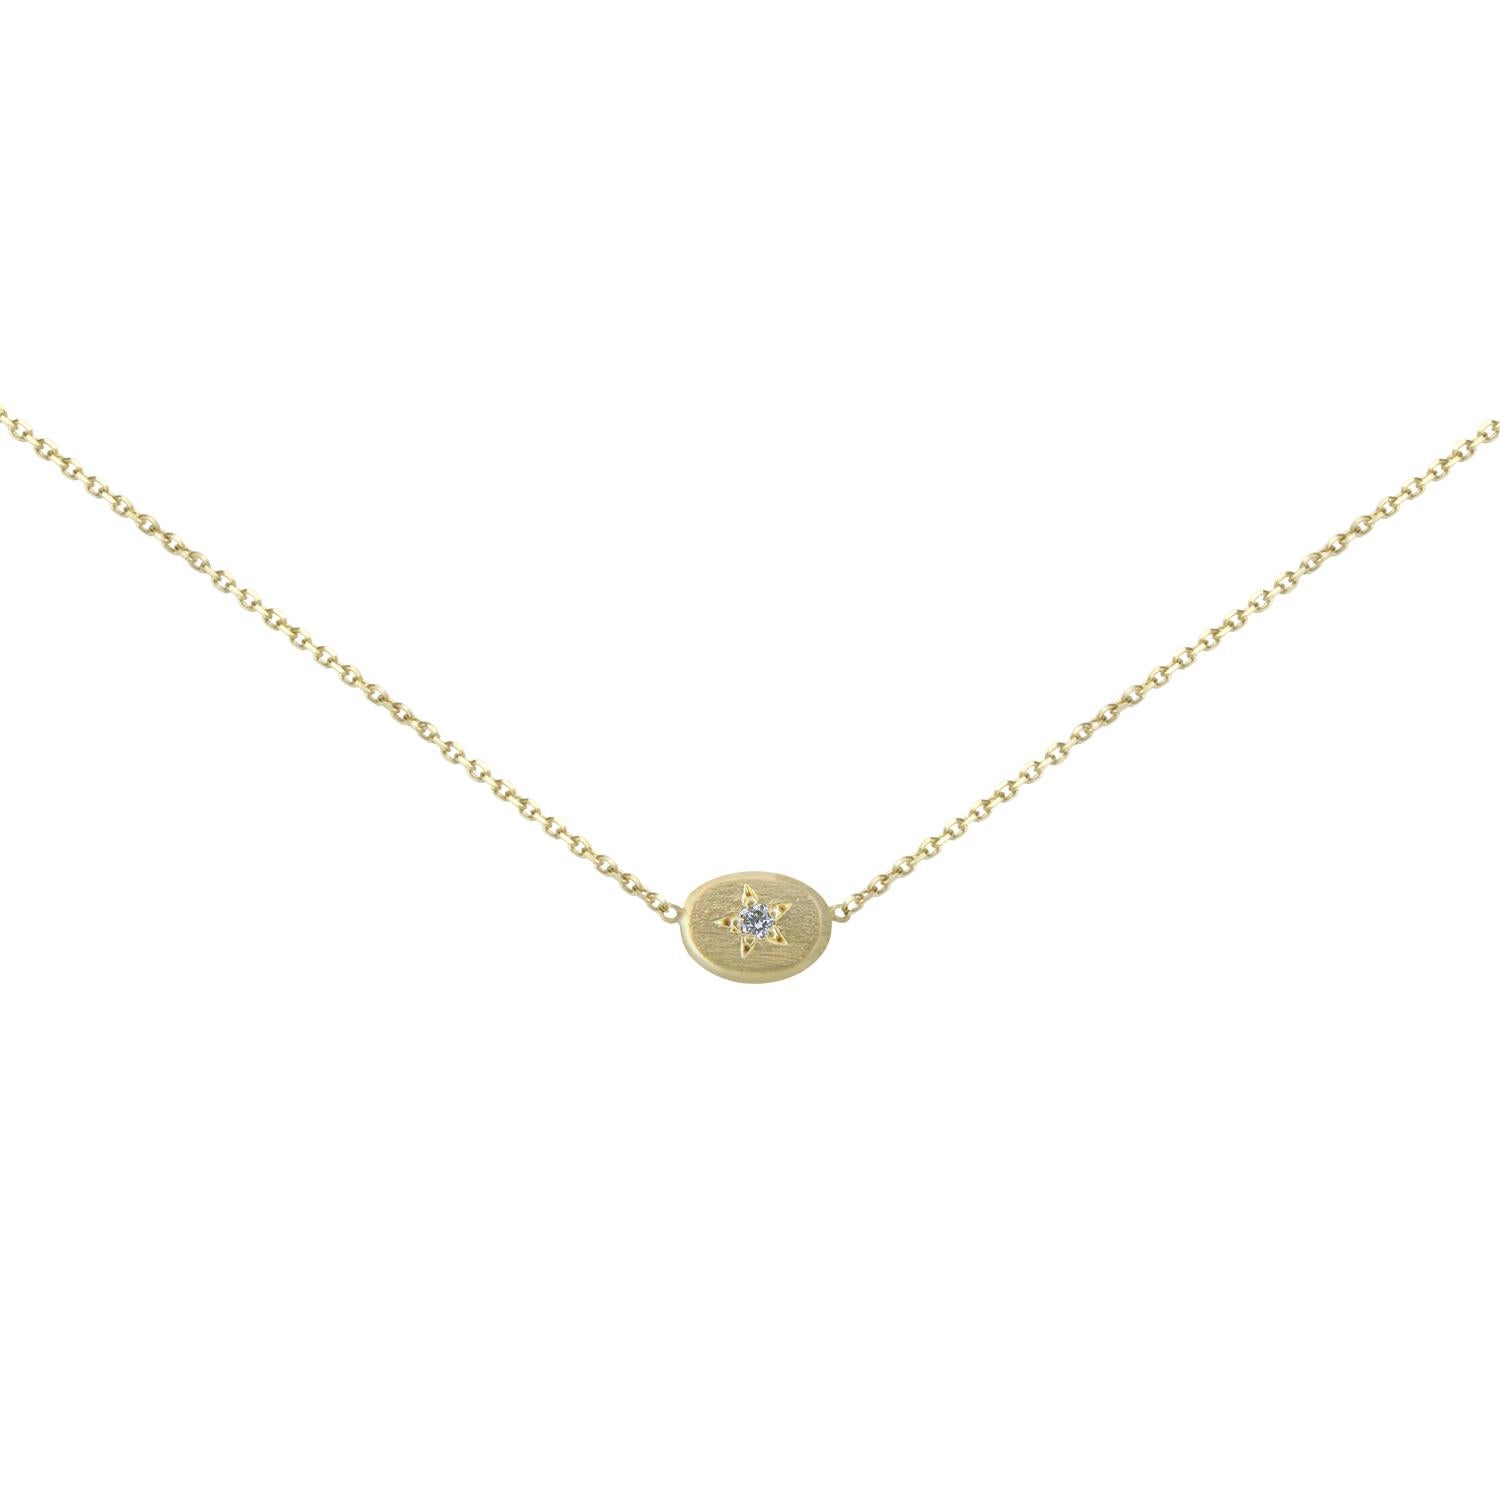 Sweet Pea 18k Yellow Gold Oval Necklace with Diamond Set Star For Sale